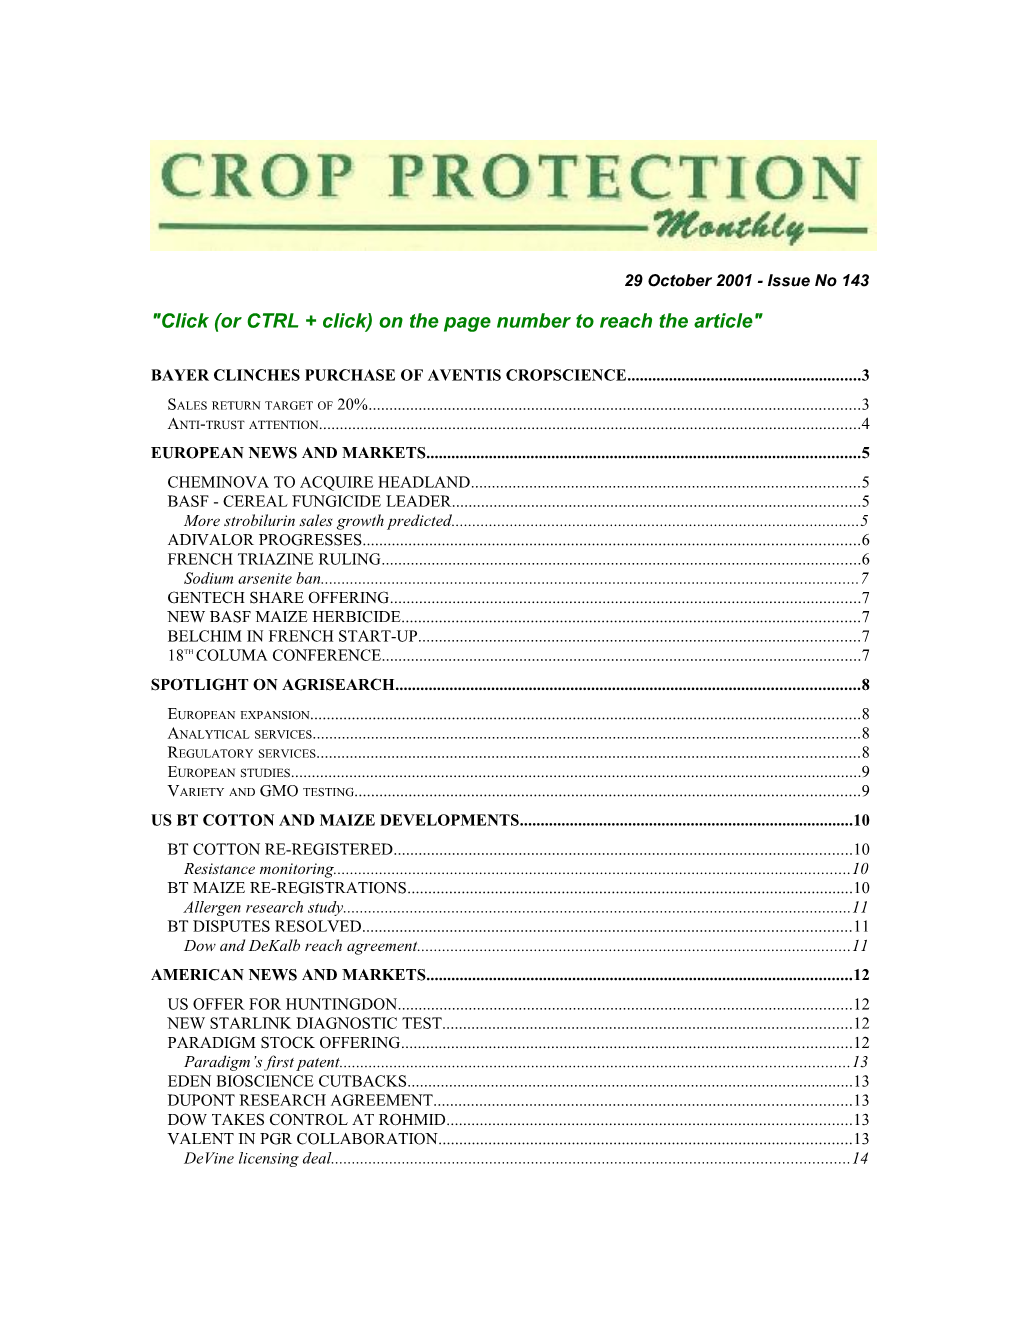 Crop Protection Monthly by E-Mail